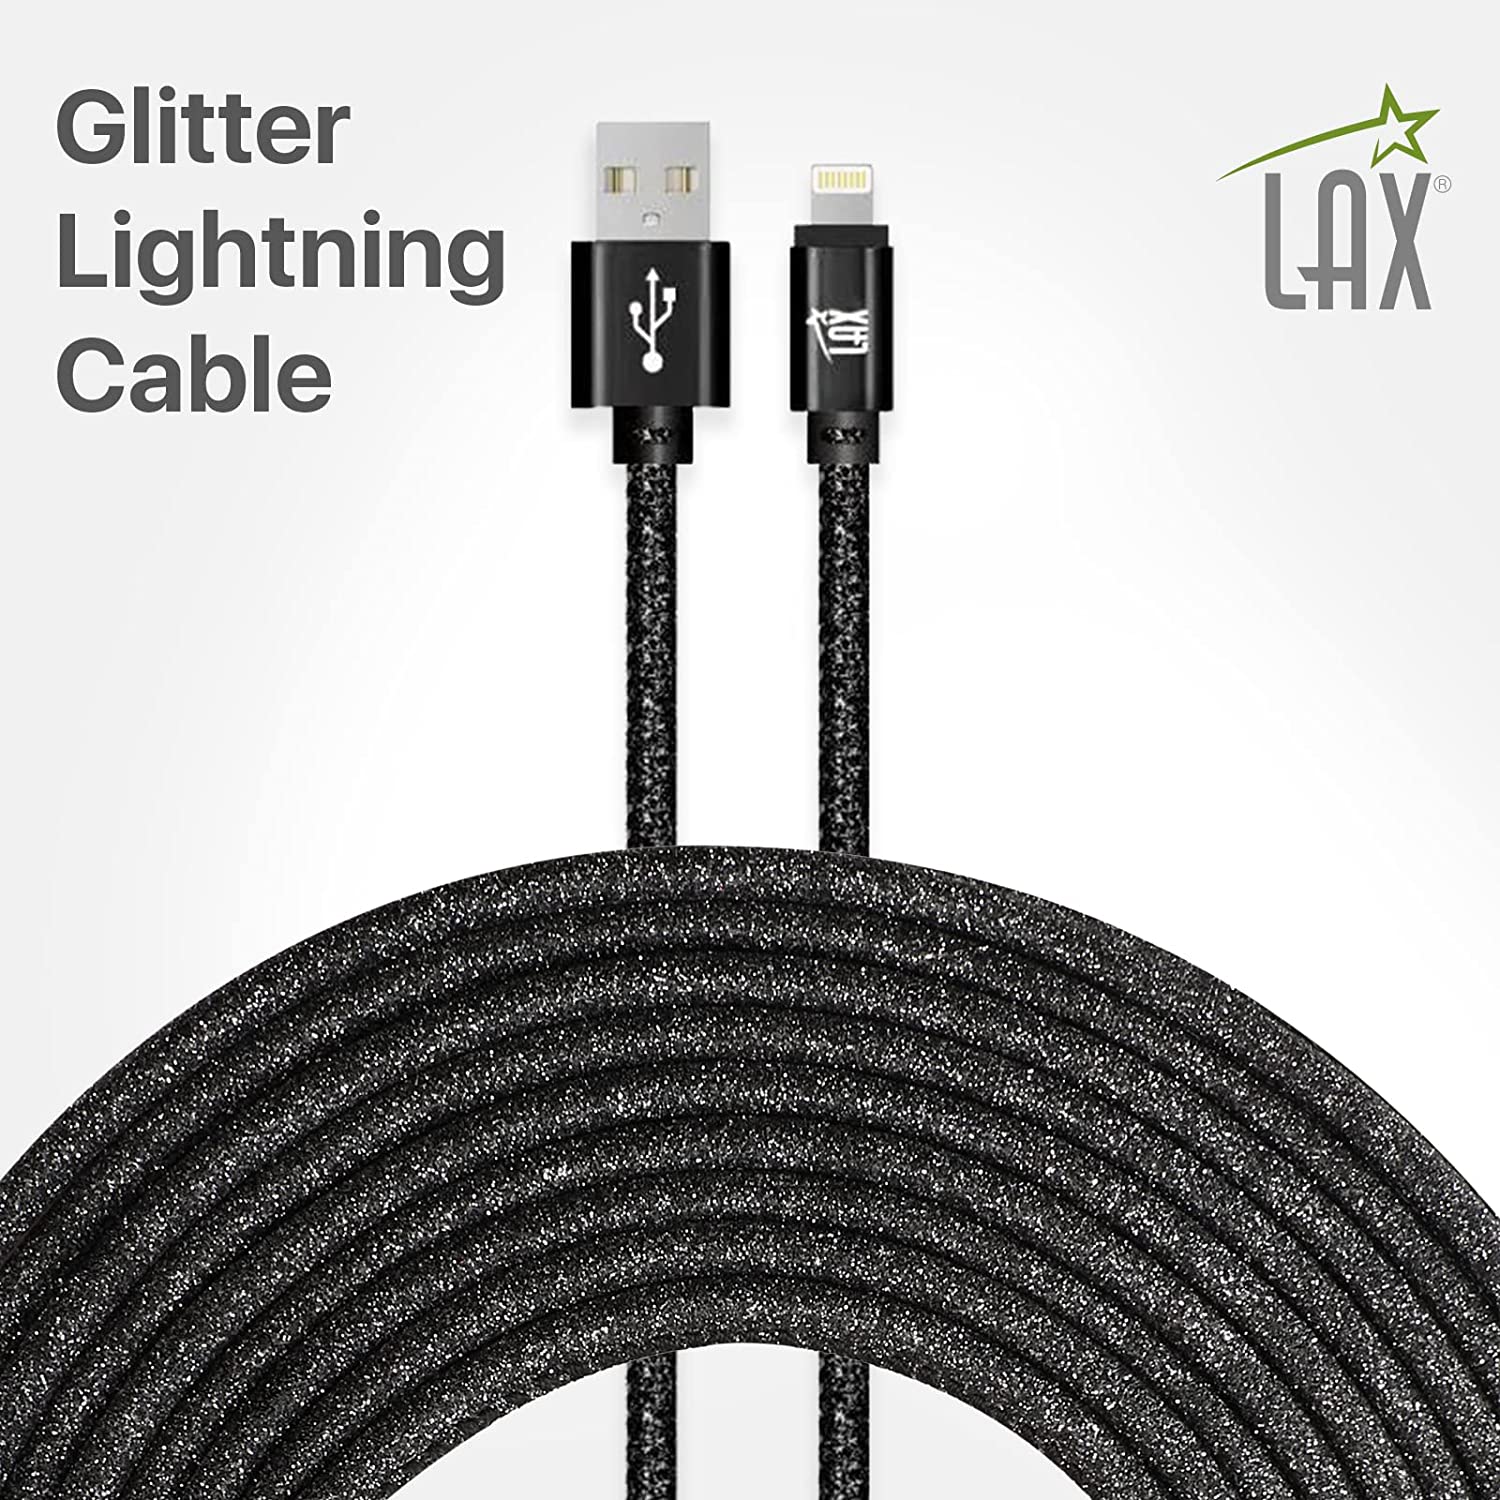 USB-Lightning cable for data and charging